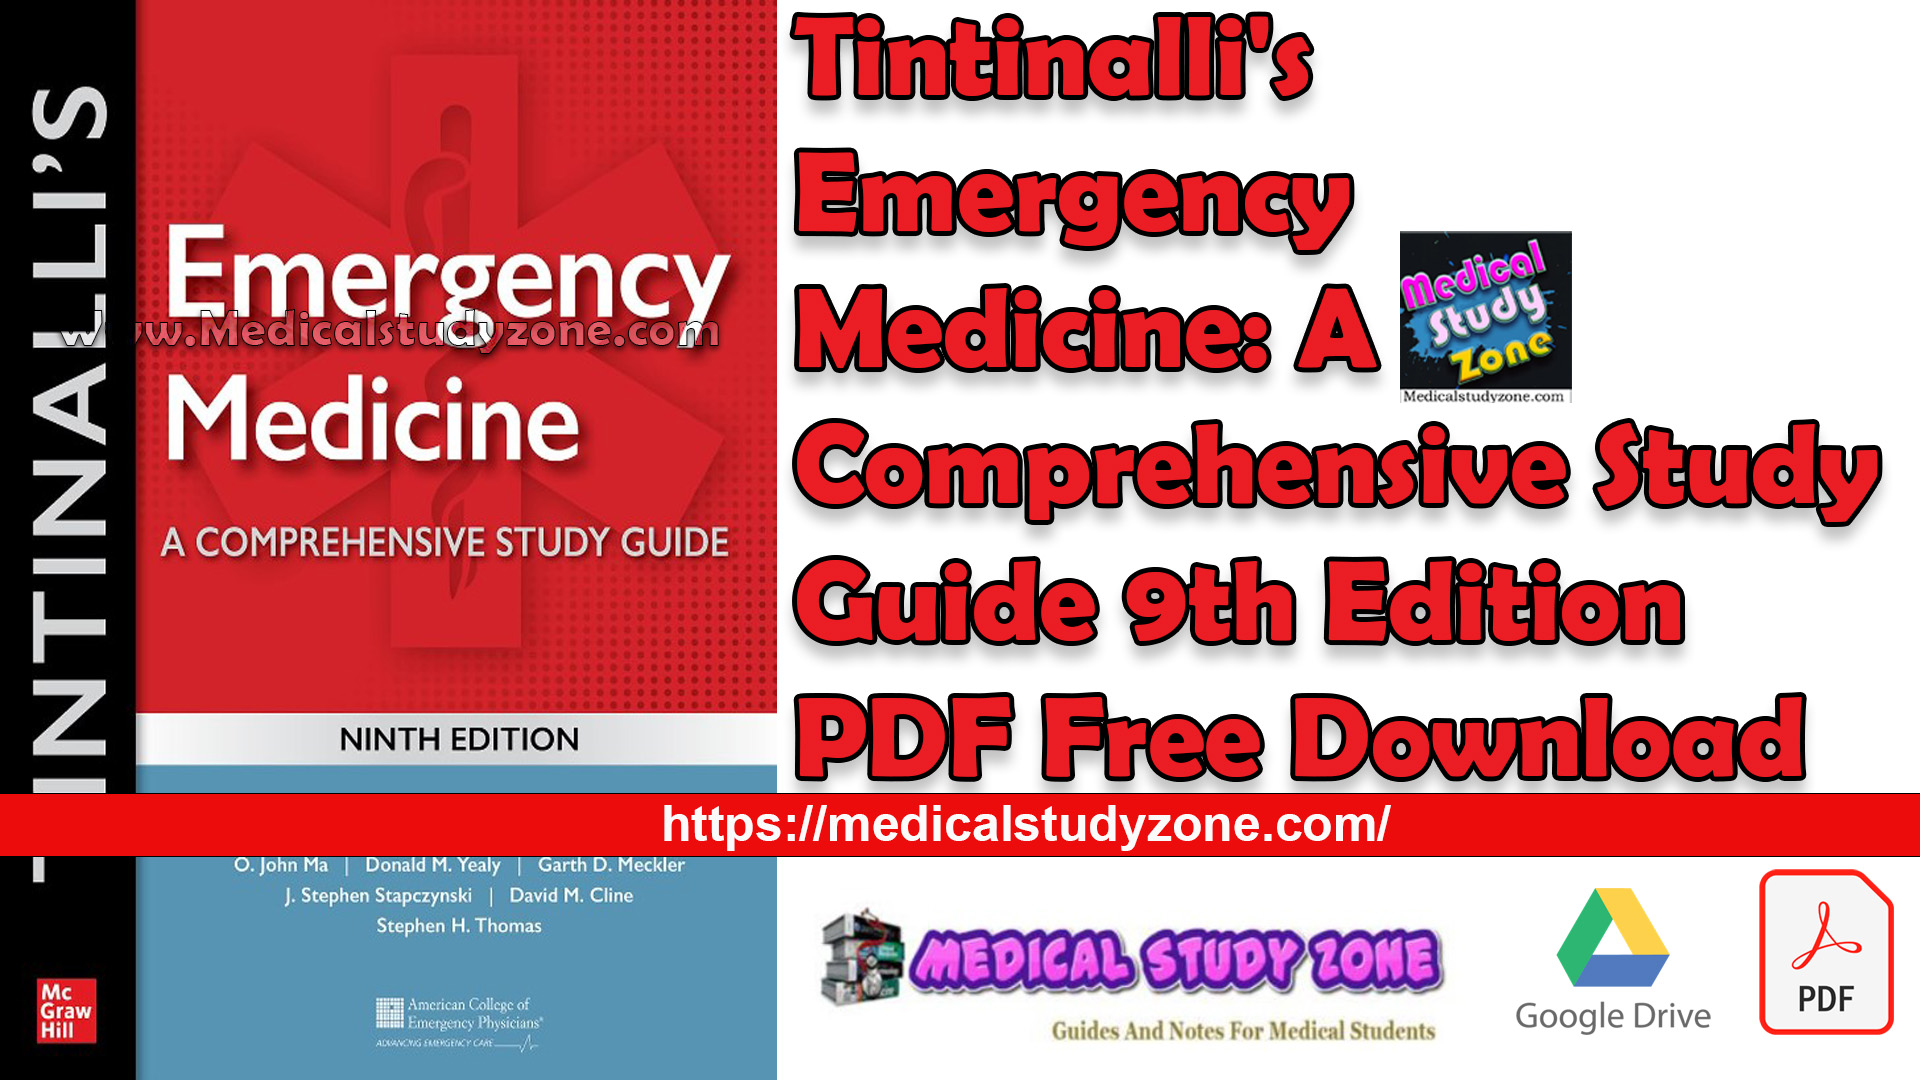 Tintinalli's Emergency Medicine: A Comprehensive Study Guide 9th Edition PDF Free Download